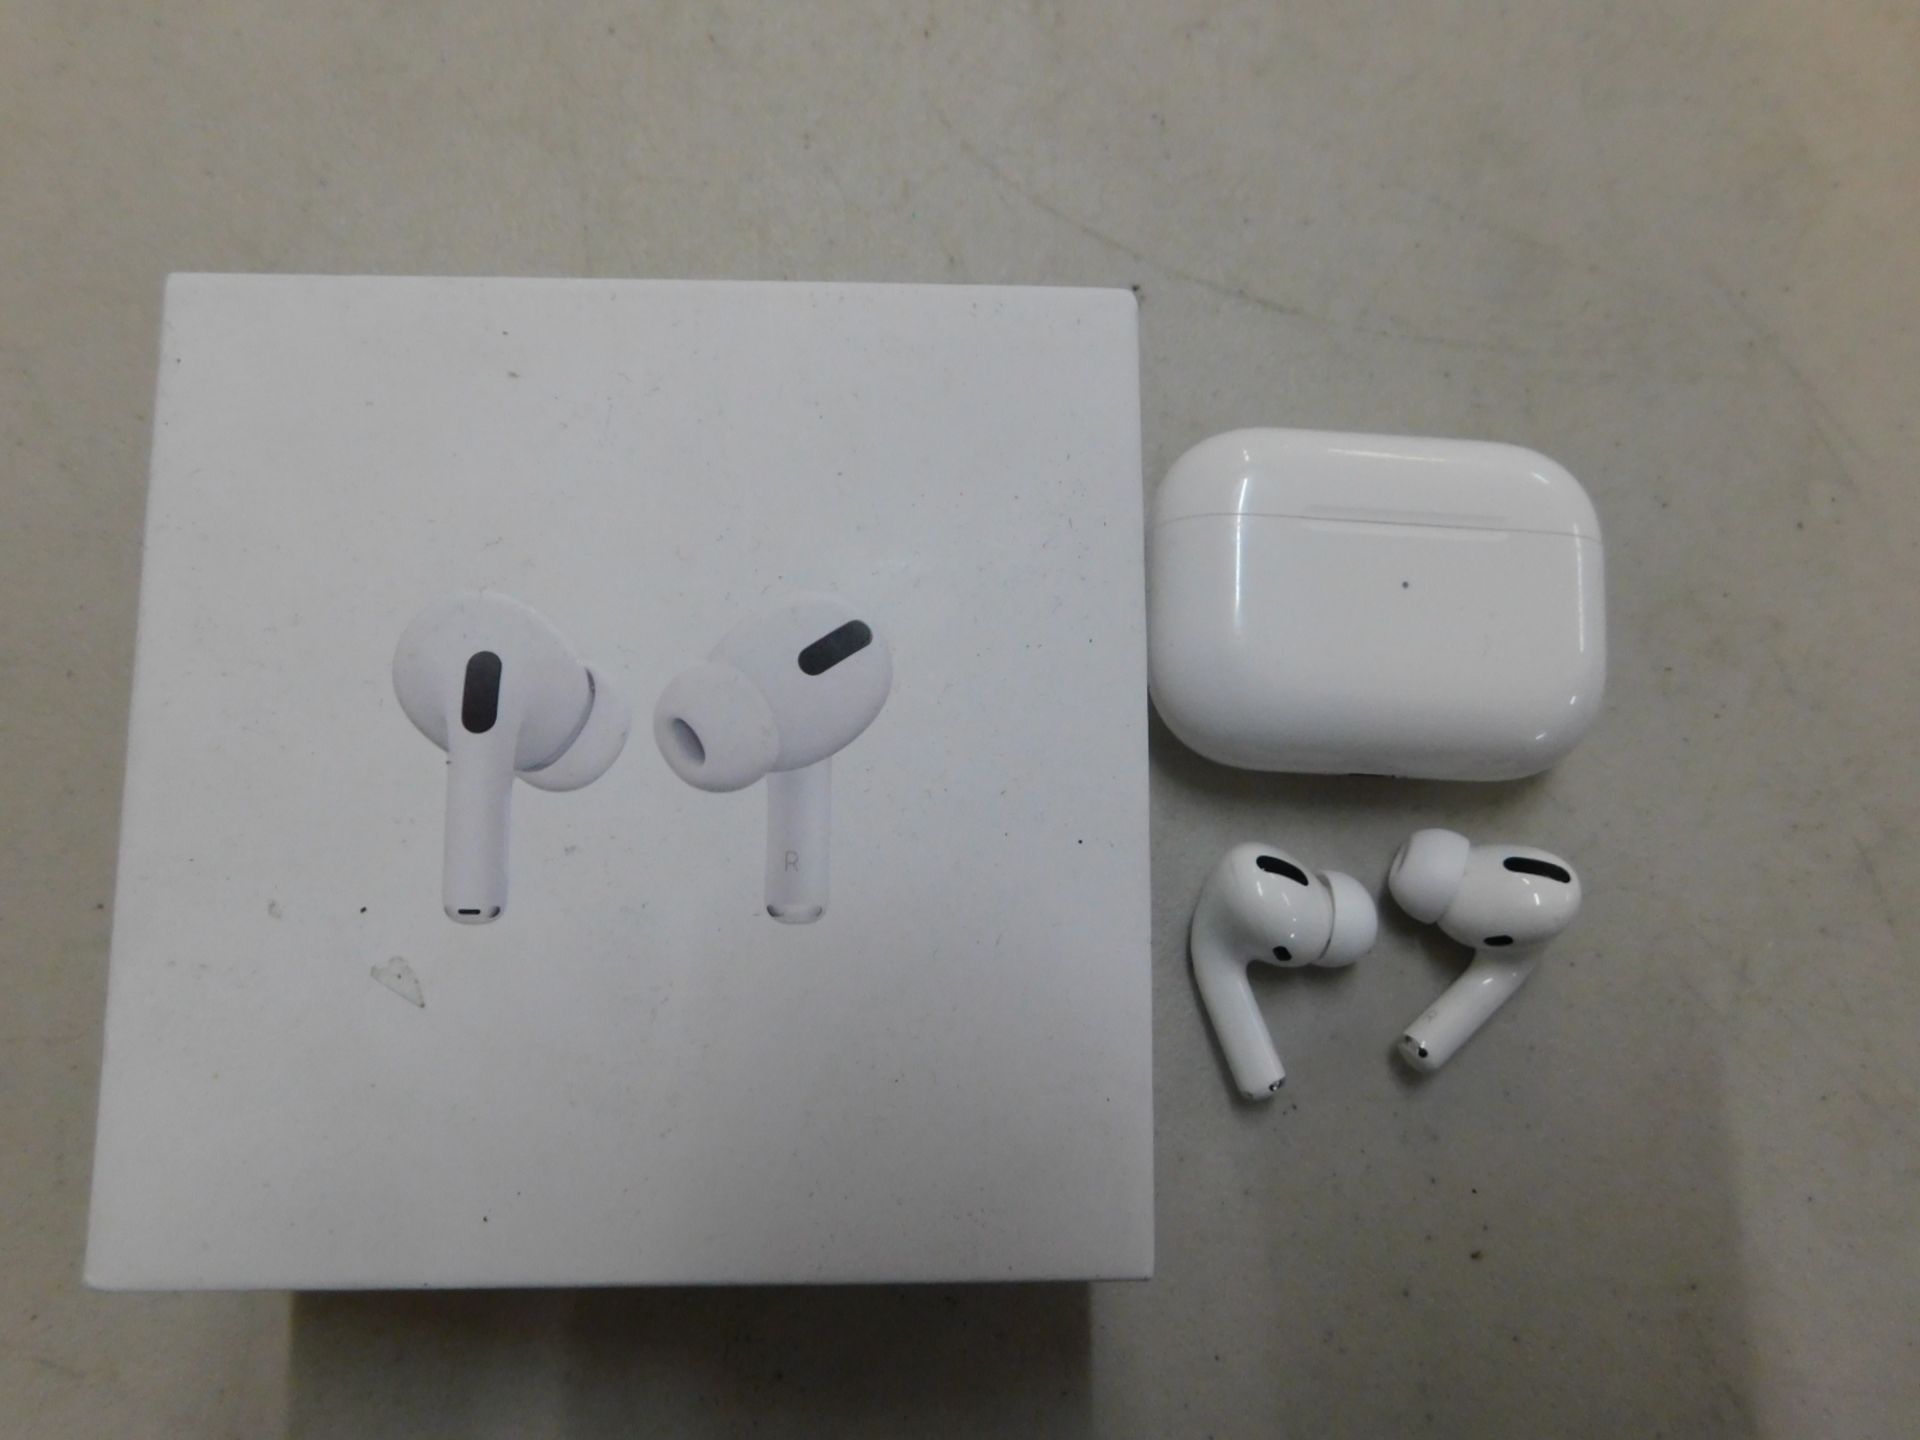 1 BOXED PAIR OF APPLE AIRPODS PRO BLUETOOTH EARPHONES WITH WIRELESS CHARGING CASE RRP Â£239.99